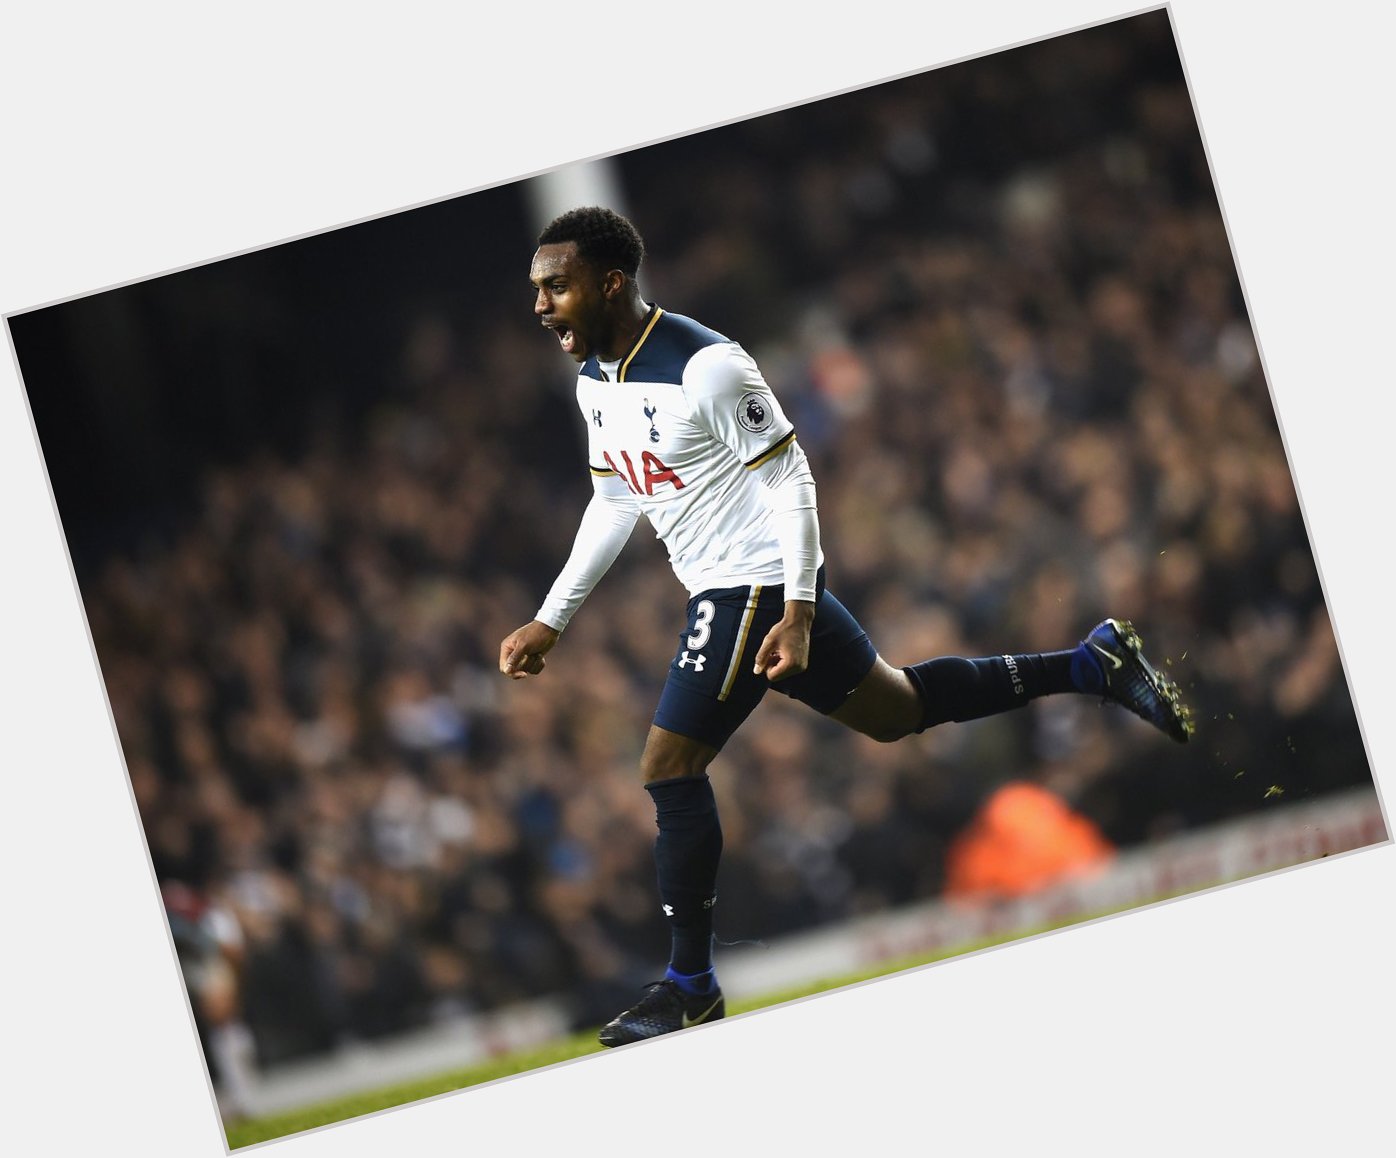 Happy birthday to the real man Danny Rose. Best LB in the league. We are so lucky to have him. 